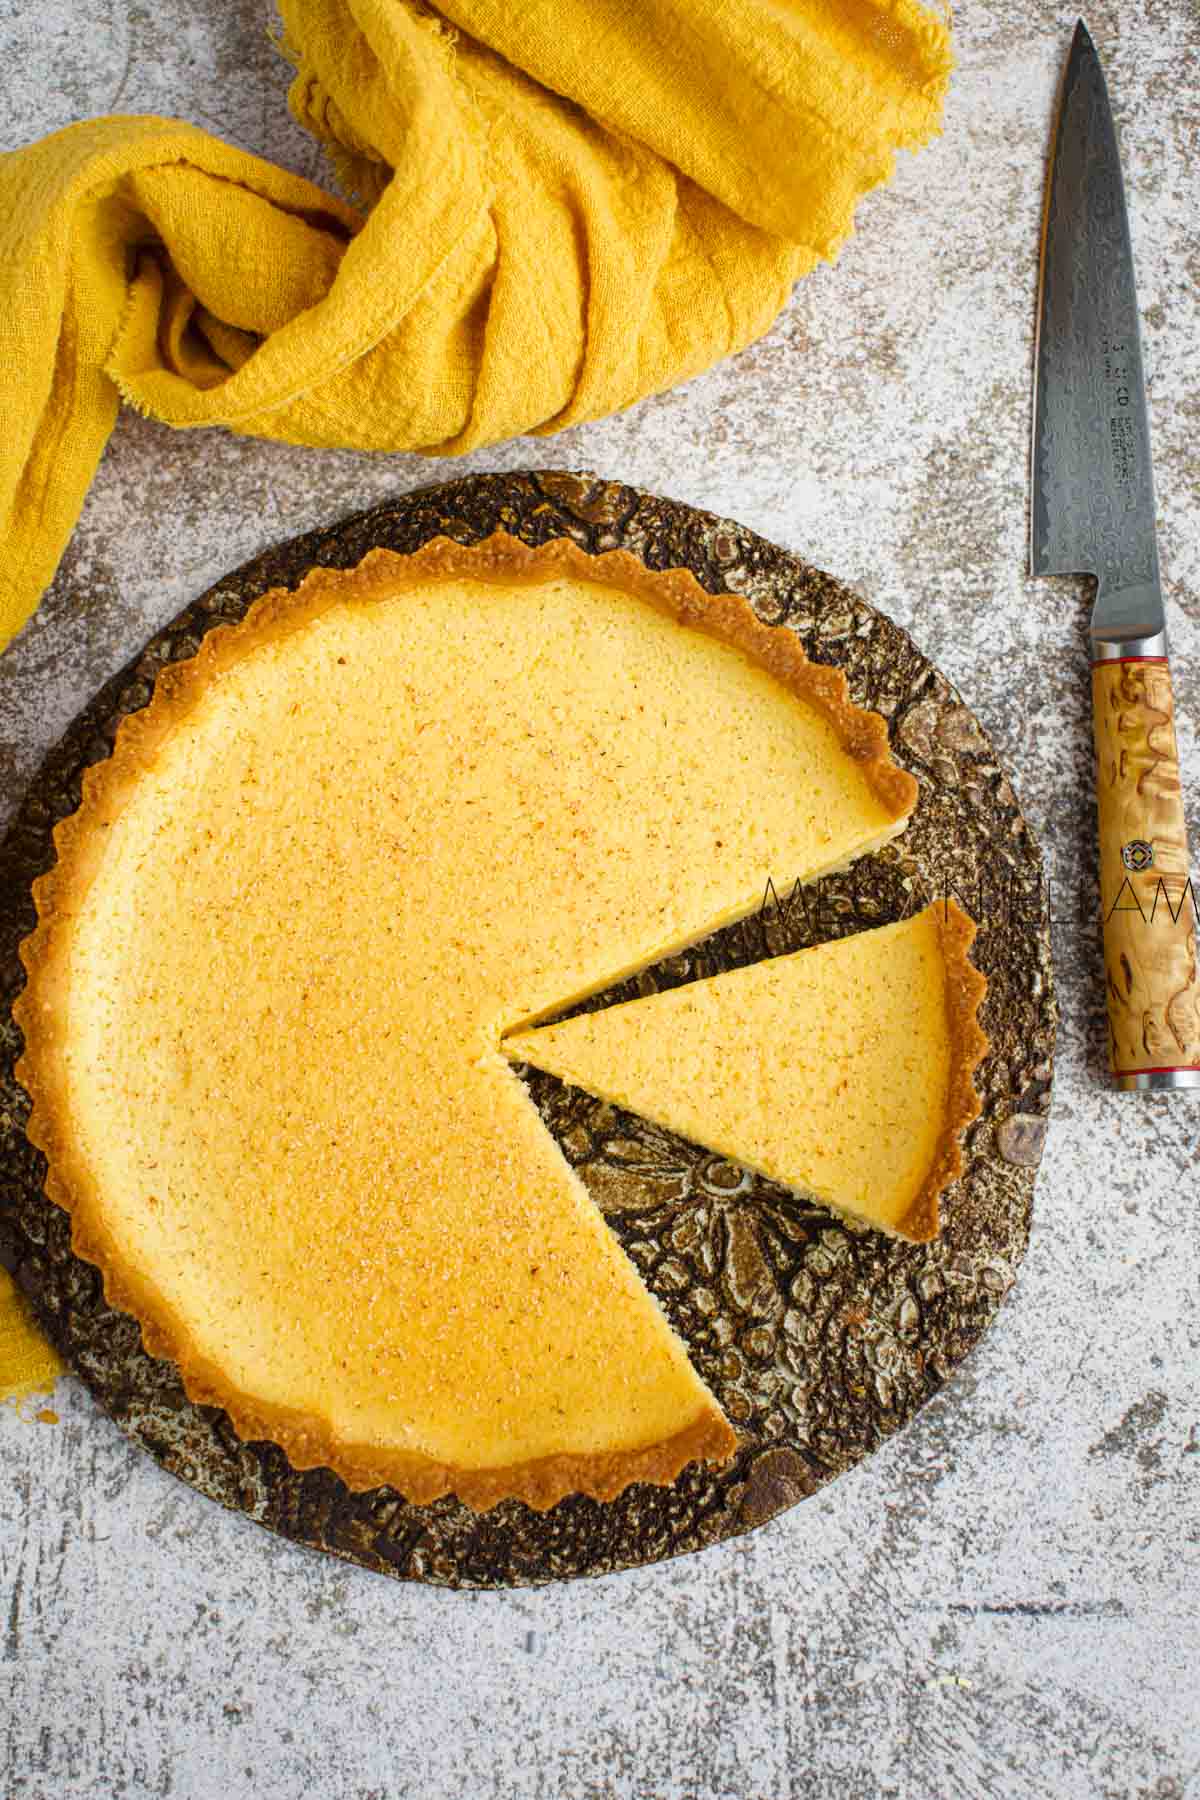 A custard pie with two slices cut out of it.